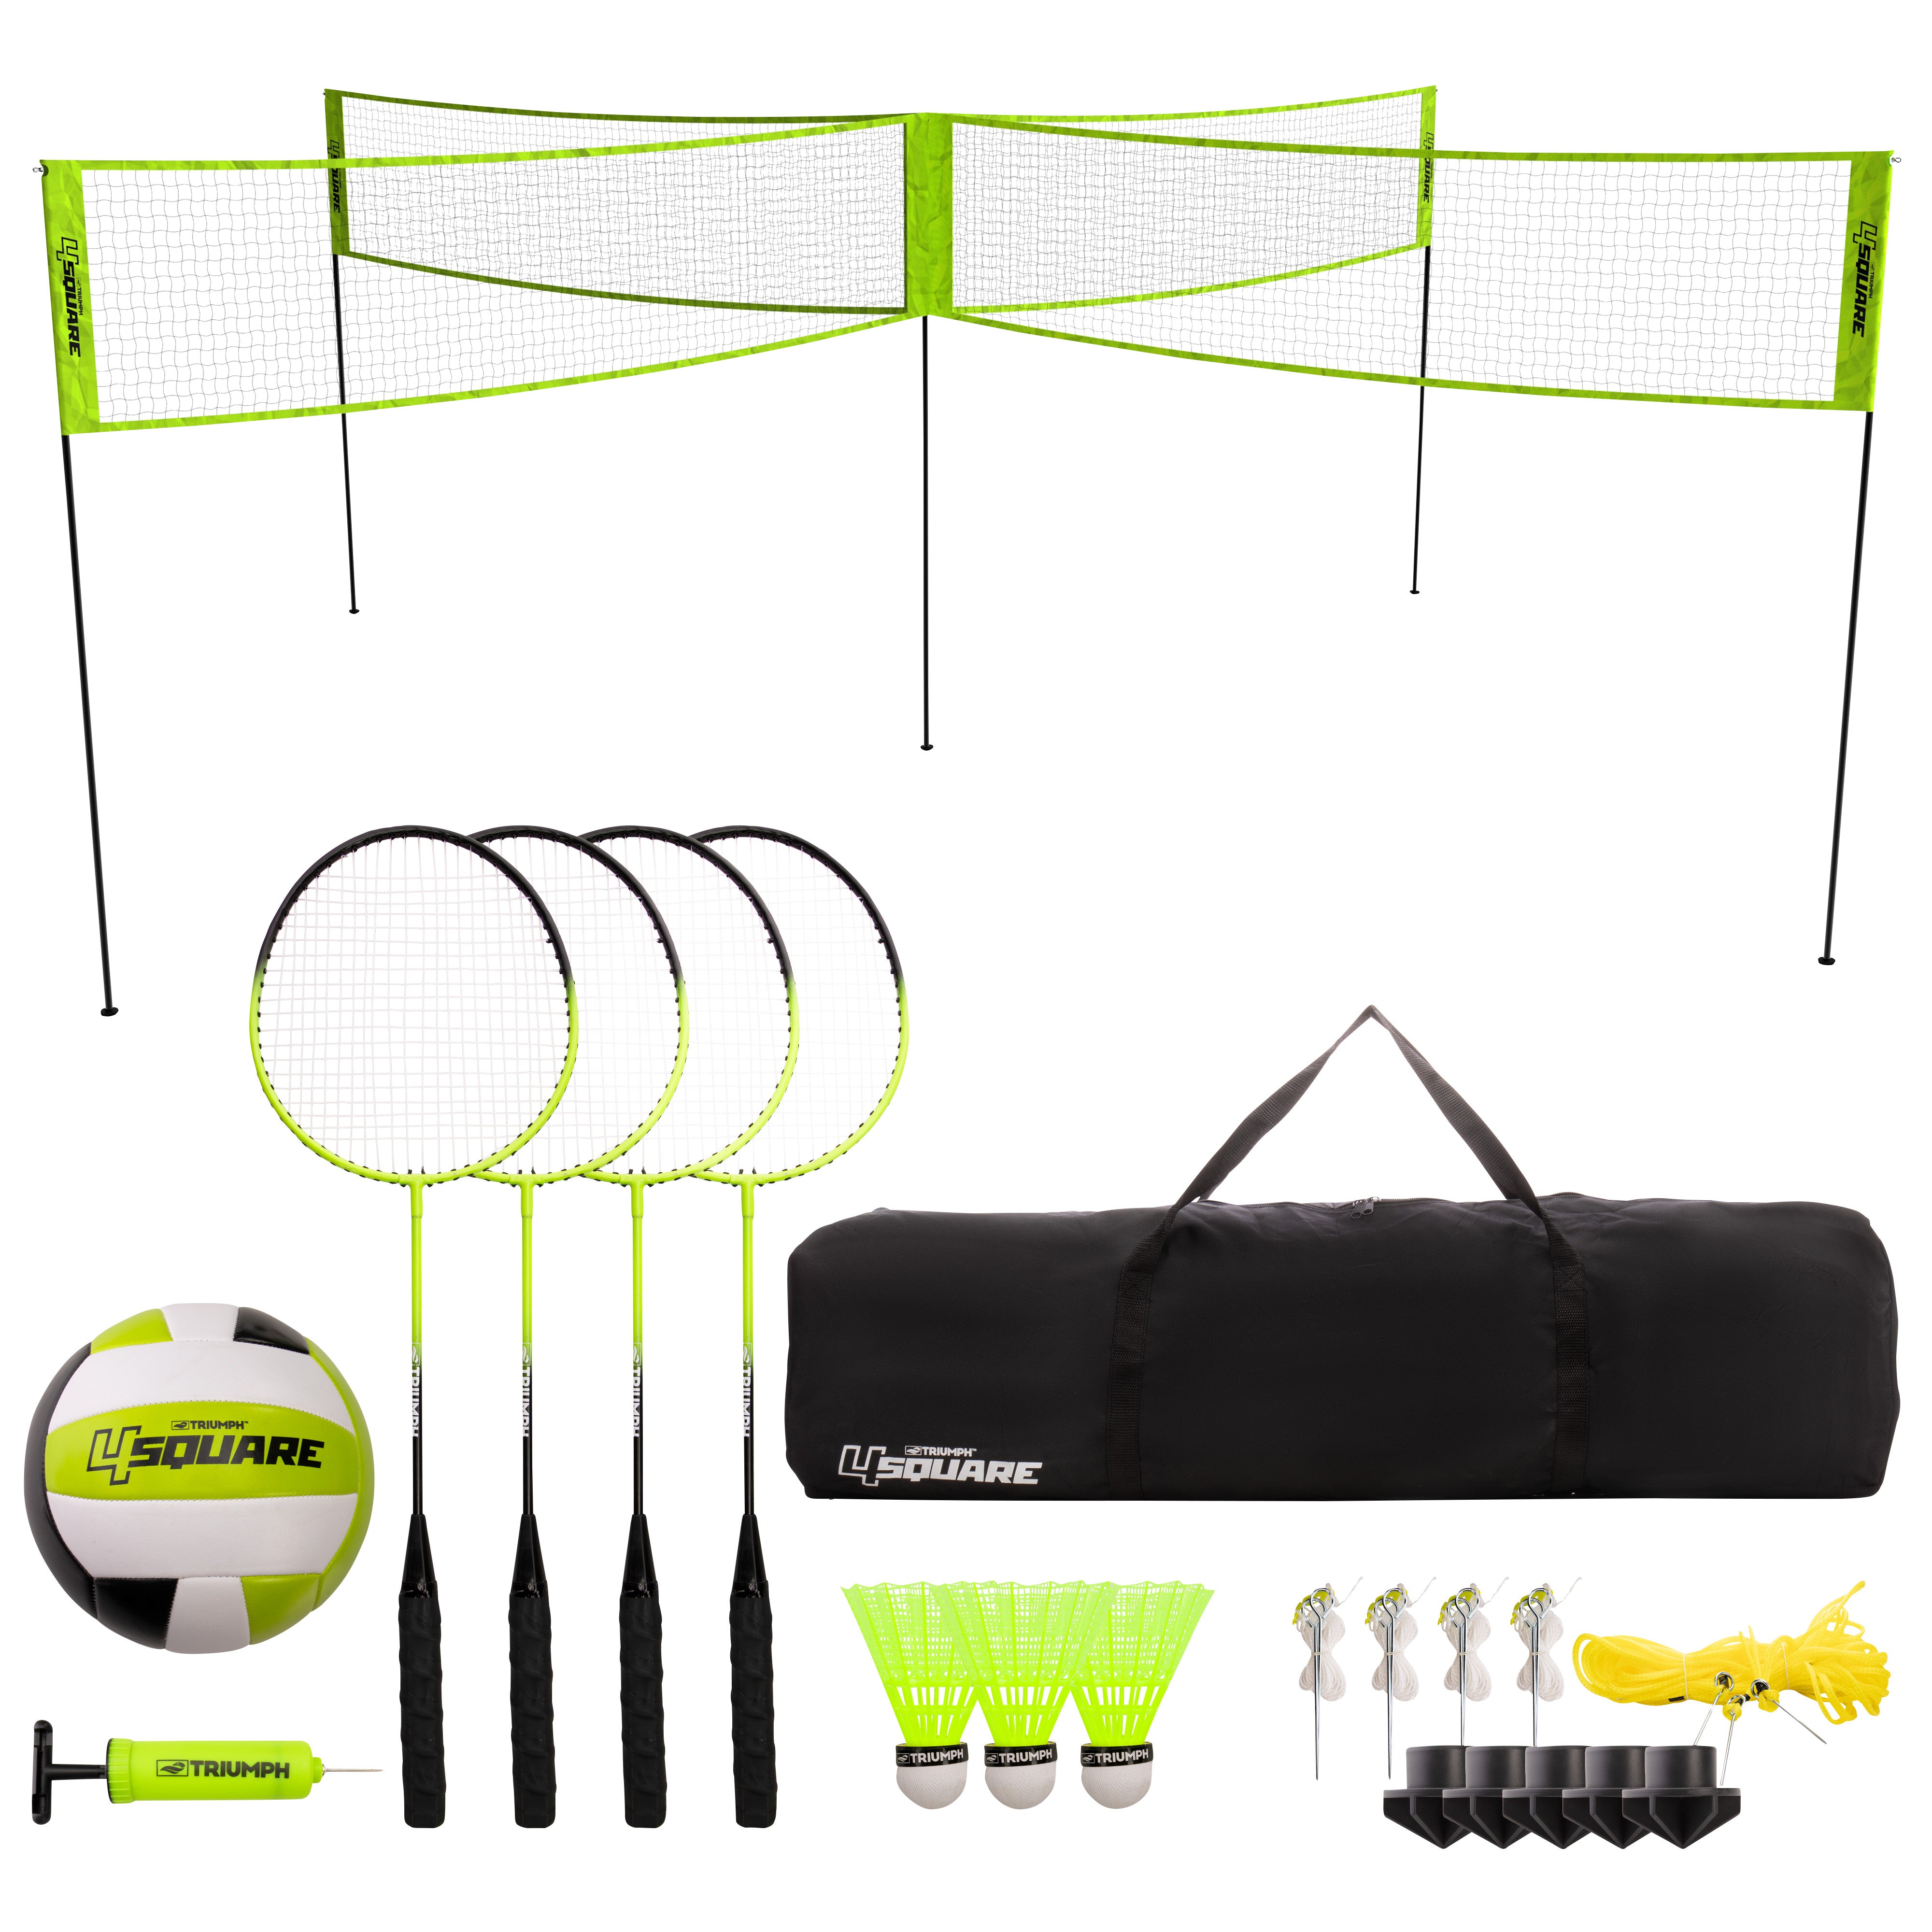 4 Square Volleyball Badminton Set Combo